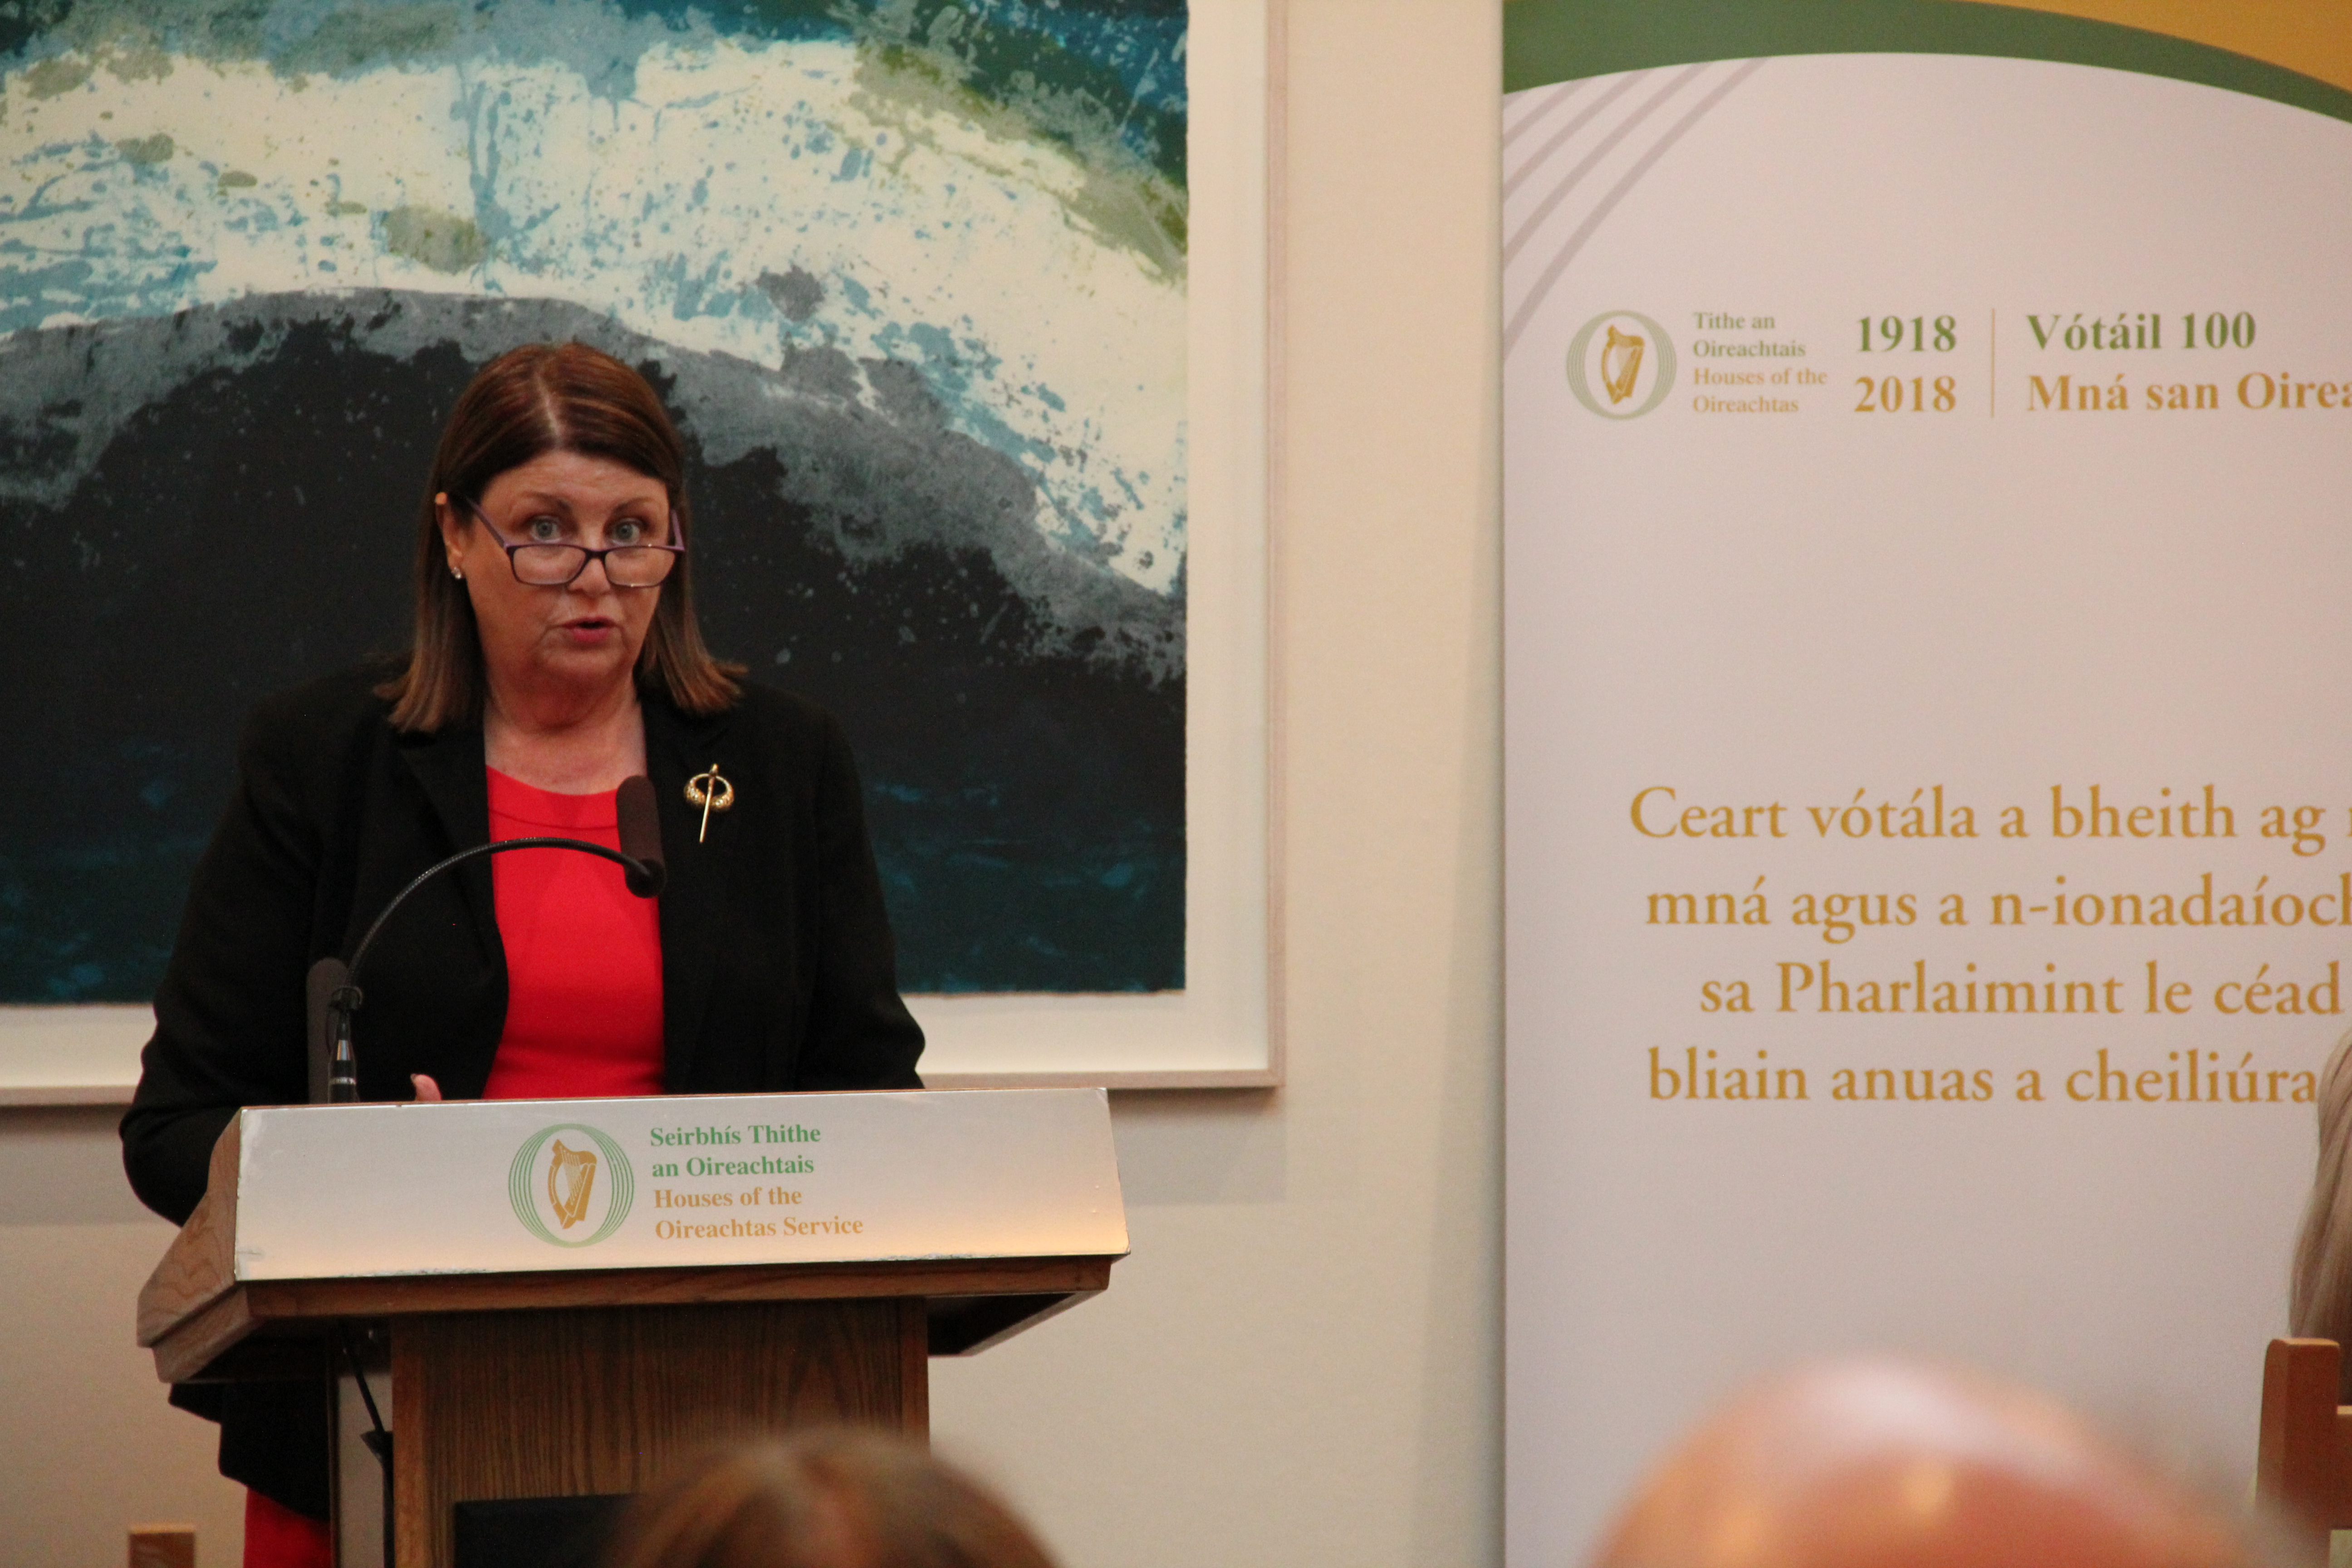 Máire Geoghegan-Quinn giving the Seachtain na Gaeilge lecture in Leinster House